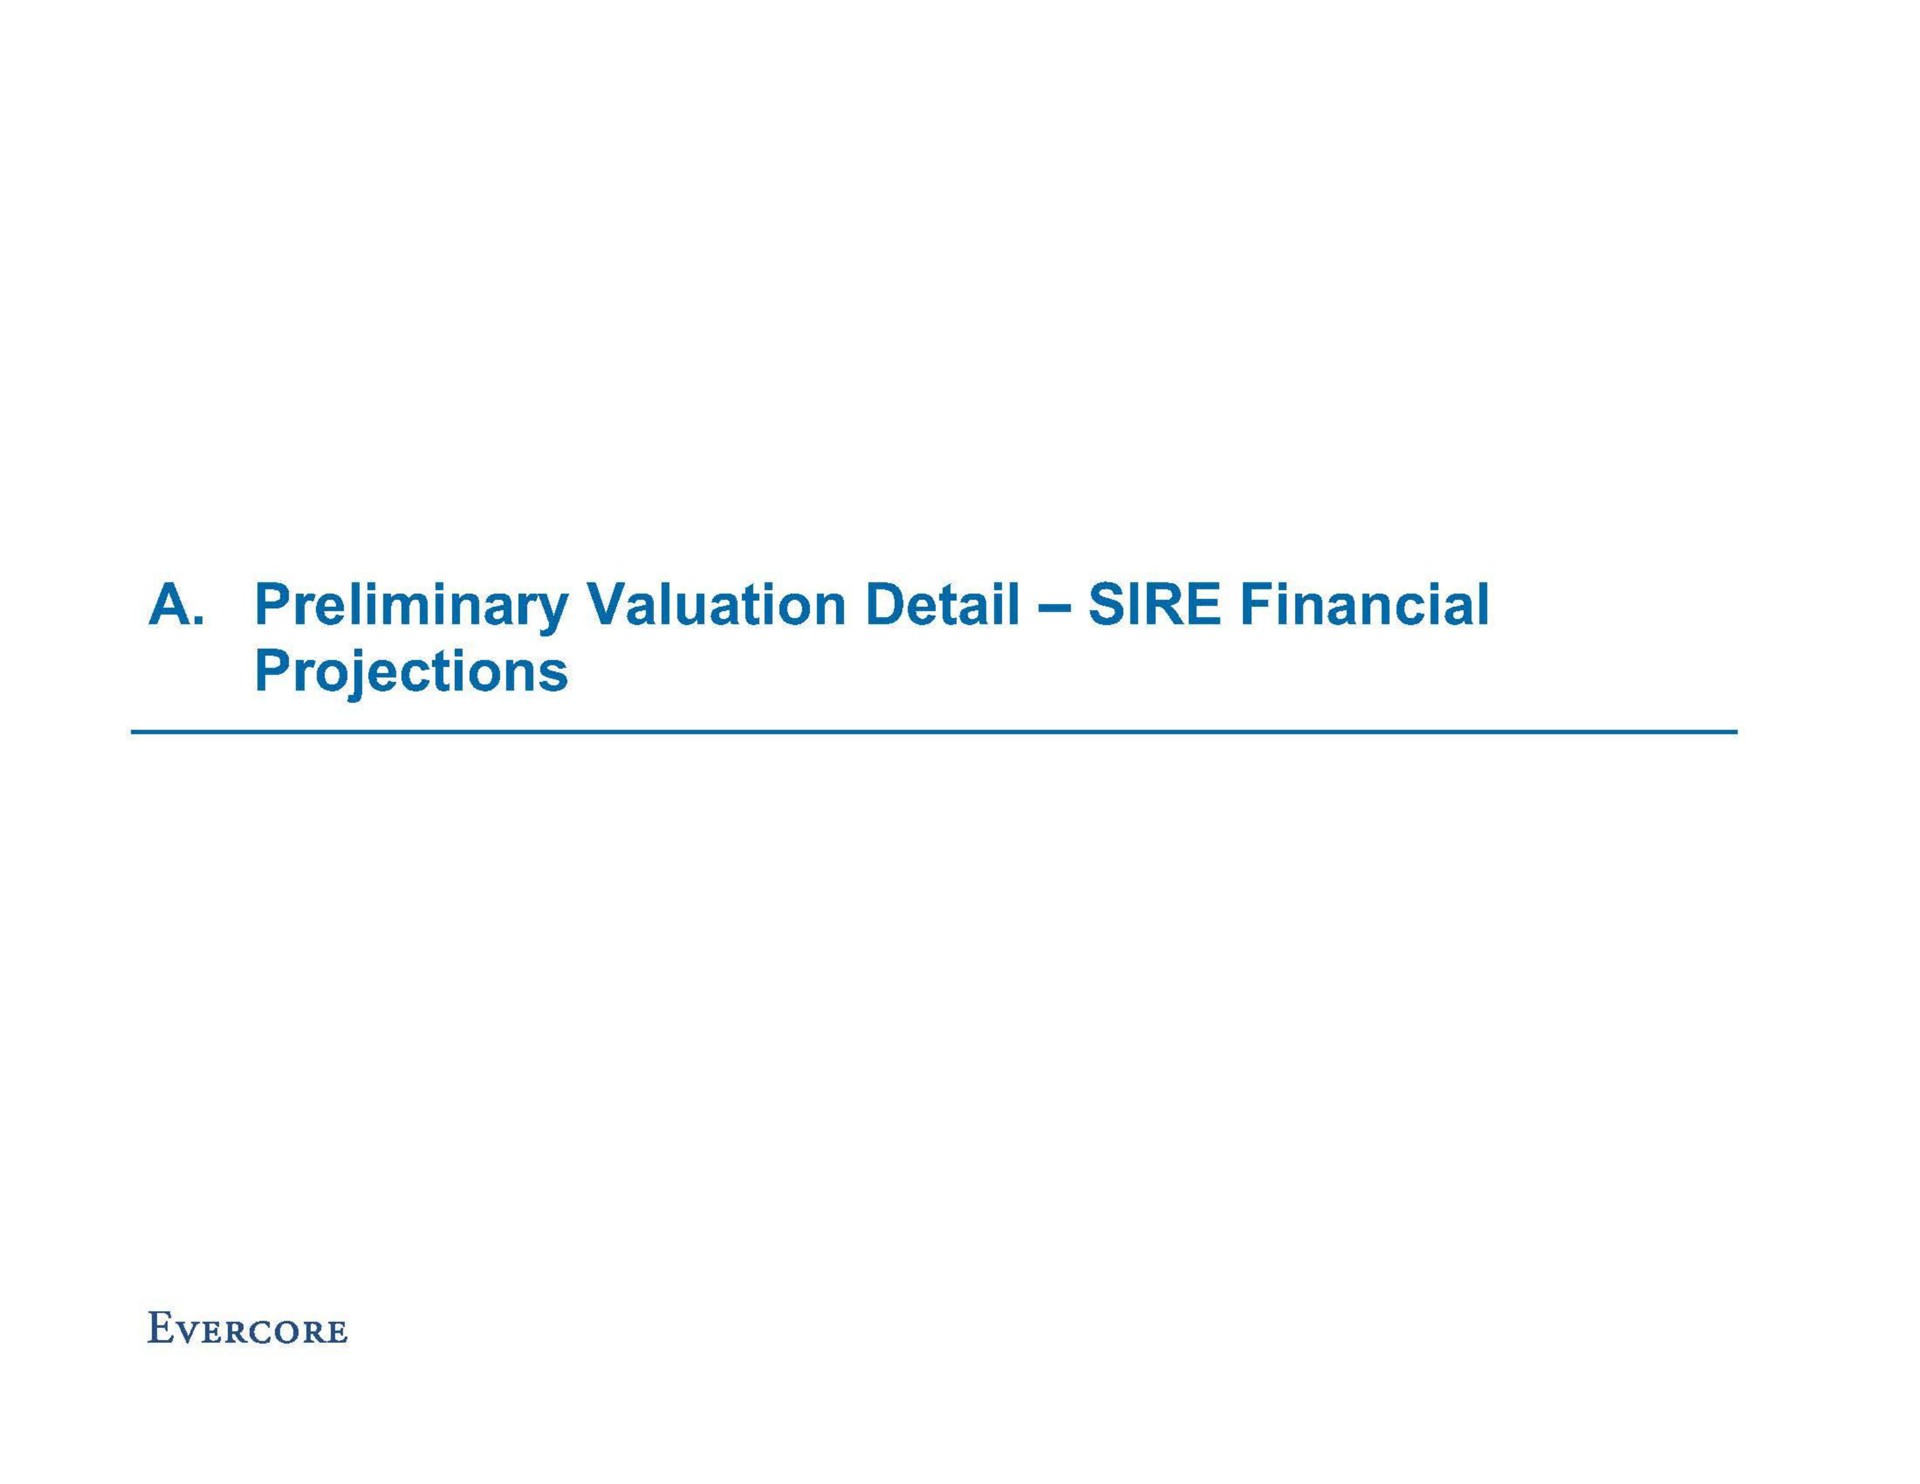 a preliminary valuation detail sire financial projections | Evercore